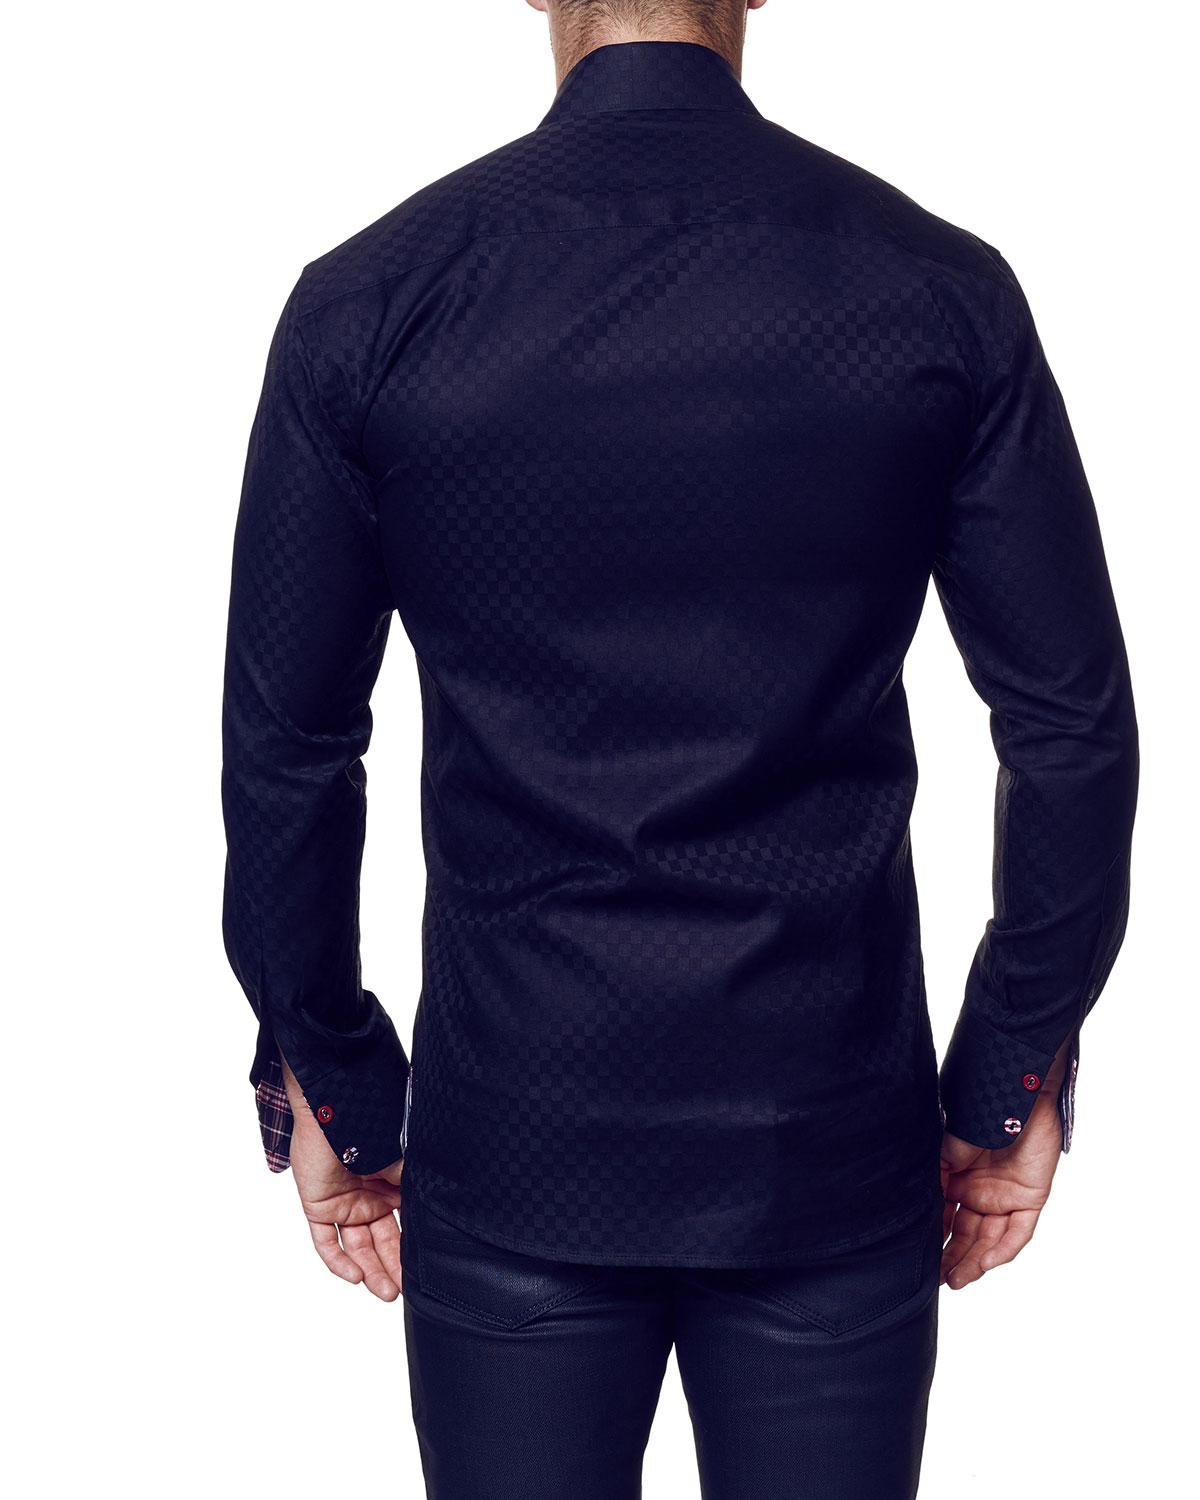 Maceoo Cotton Shaped-fit Panam Long-sleeve Dress Shirt Black for Men - Lyst